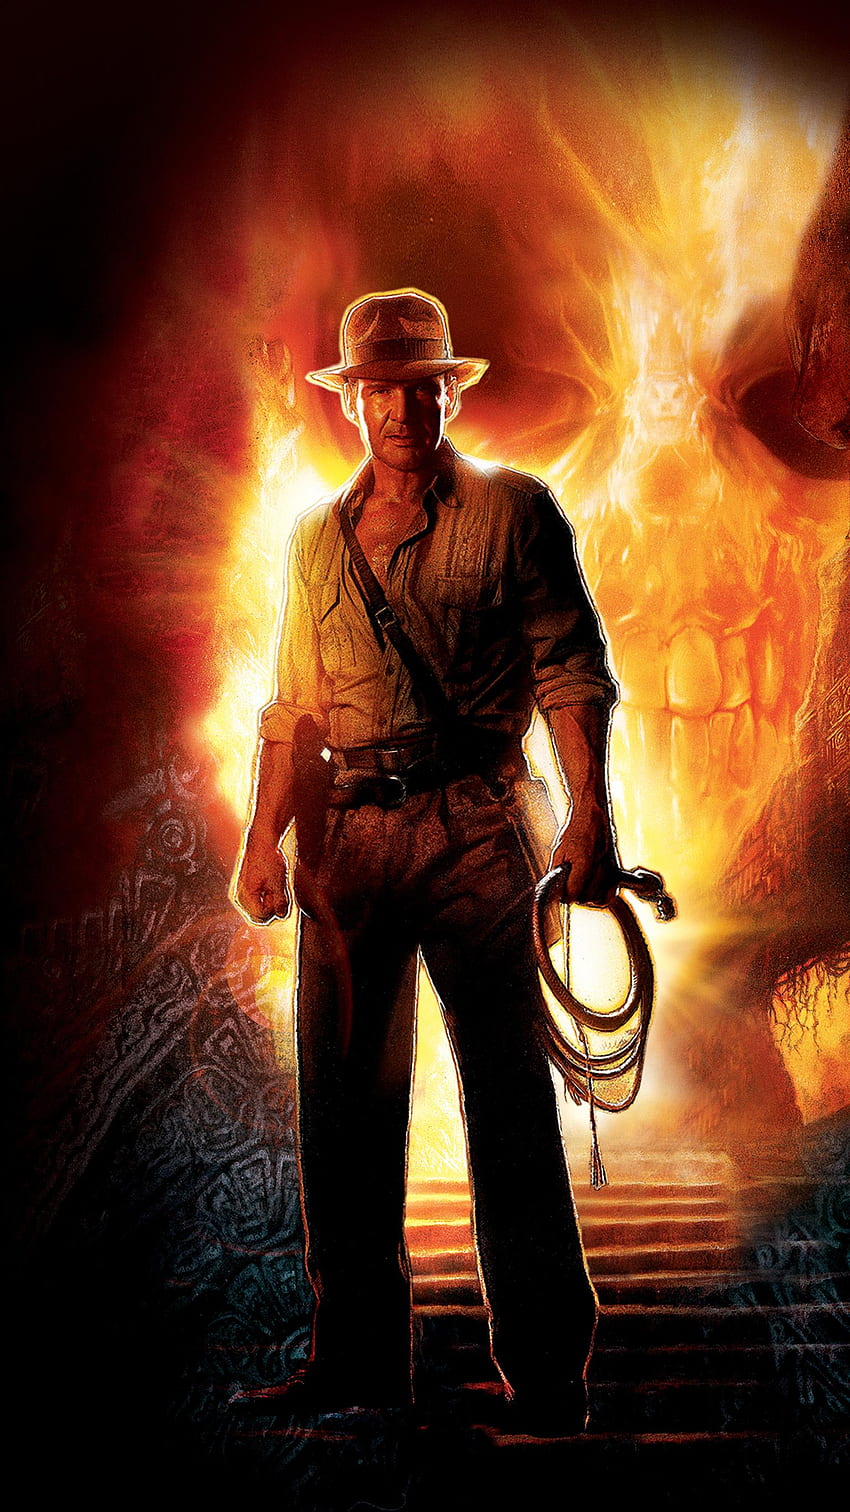 Indiana Jones and the Kingdom of the Crystal Skull (2022) movie HD phone wallpaper